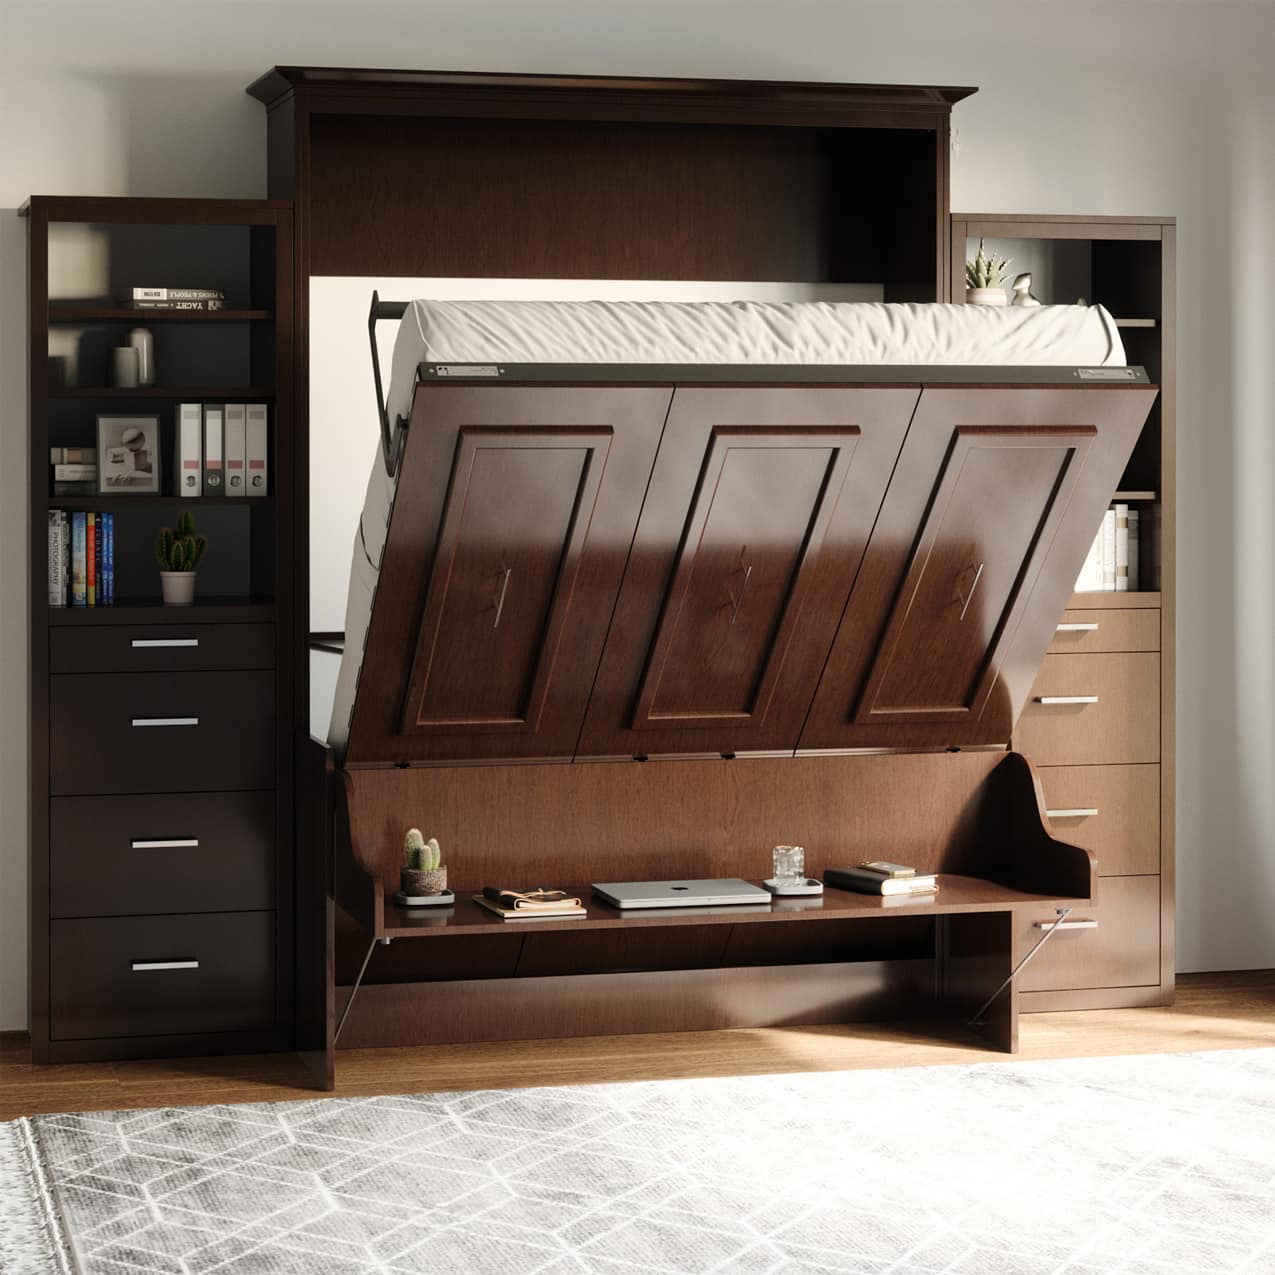 coventry queen muprhy bed with storage cabinets bed open to 45 degrees showing desk still level hidden hideaway hide away hide-a-way diy murphy bed kit fold out pull down wall bed cabinet desk bed combo home office guest bed customizable storage adjustable shelves pullout nightstand drawers